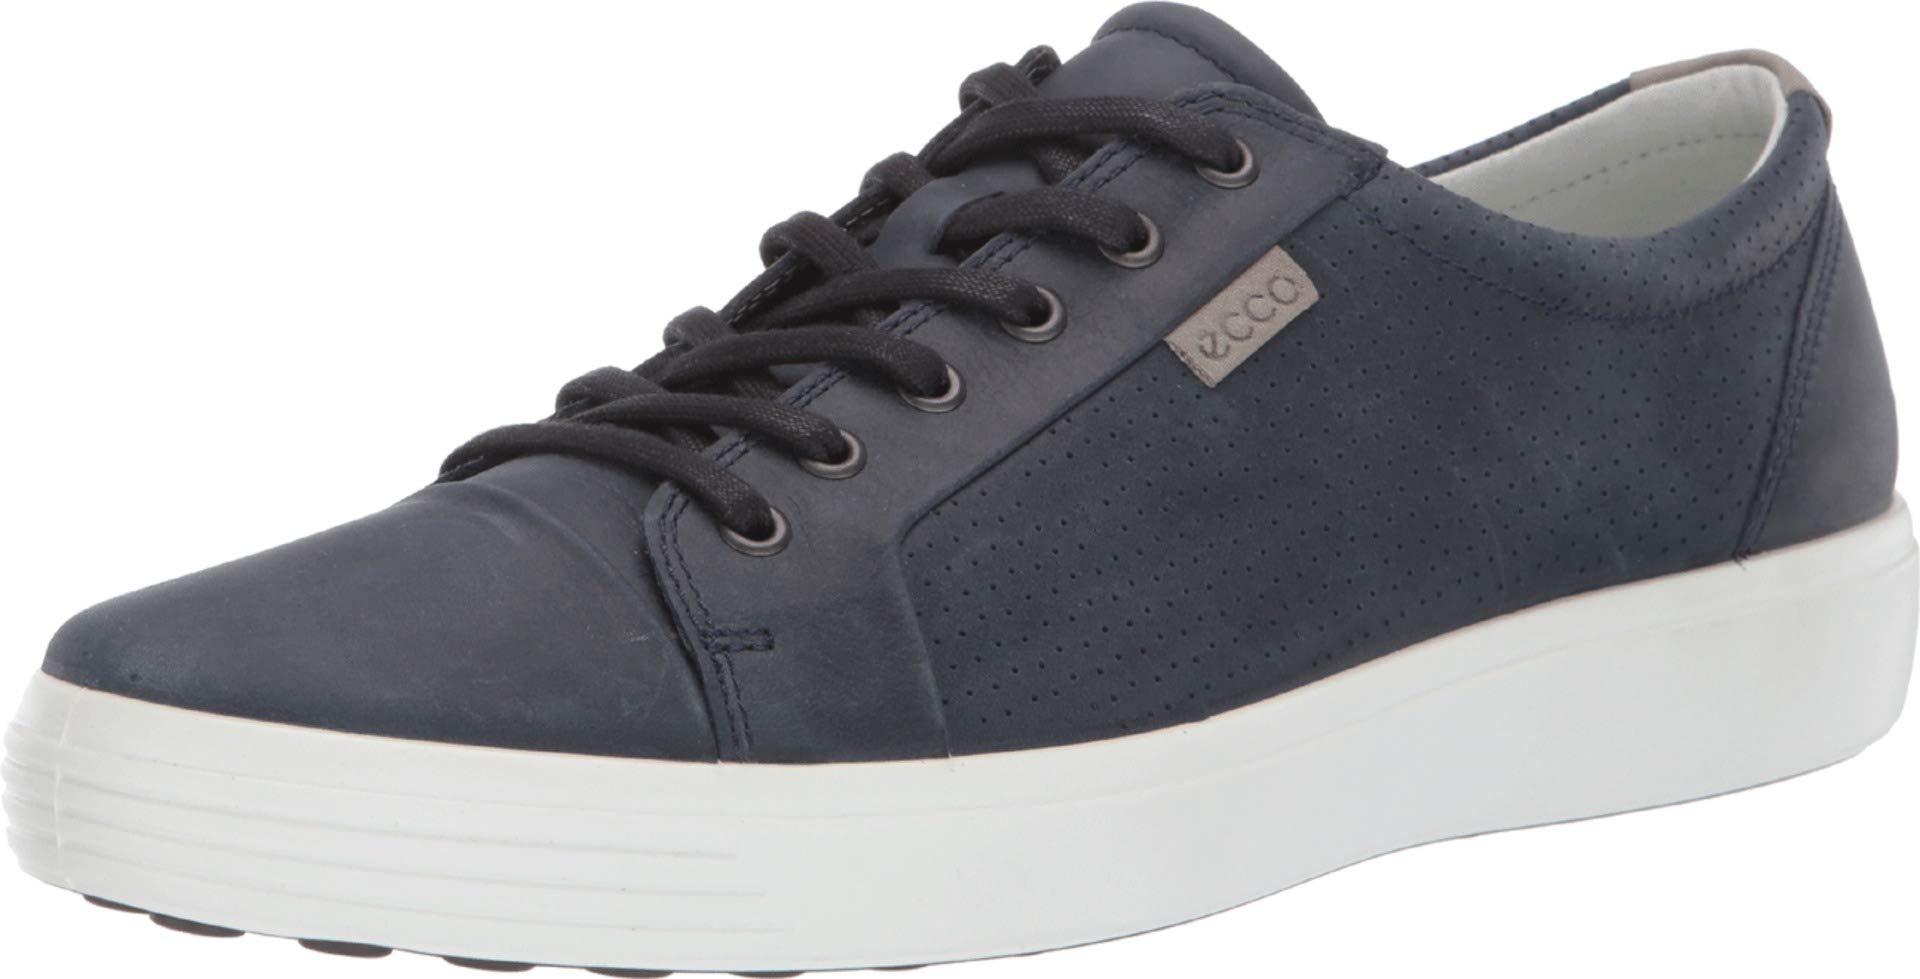 Ecco Leather Soft 7 City Sneaker in Blue for Men - Lyst